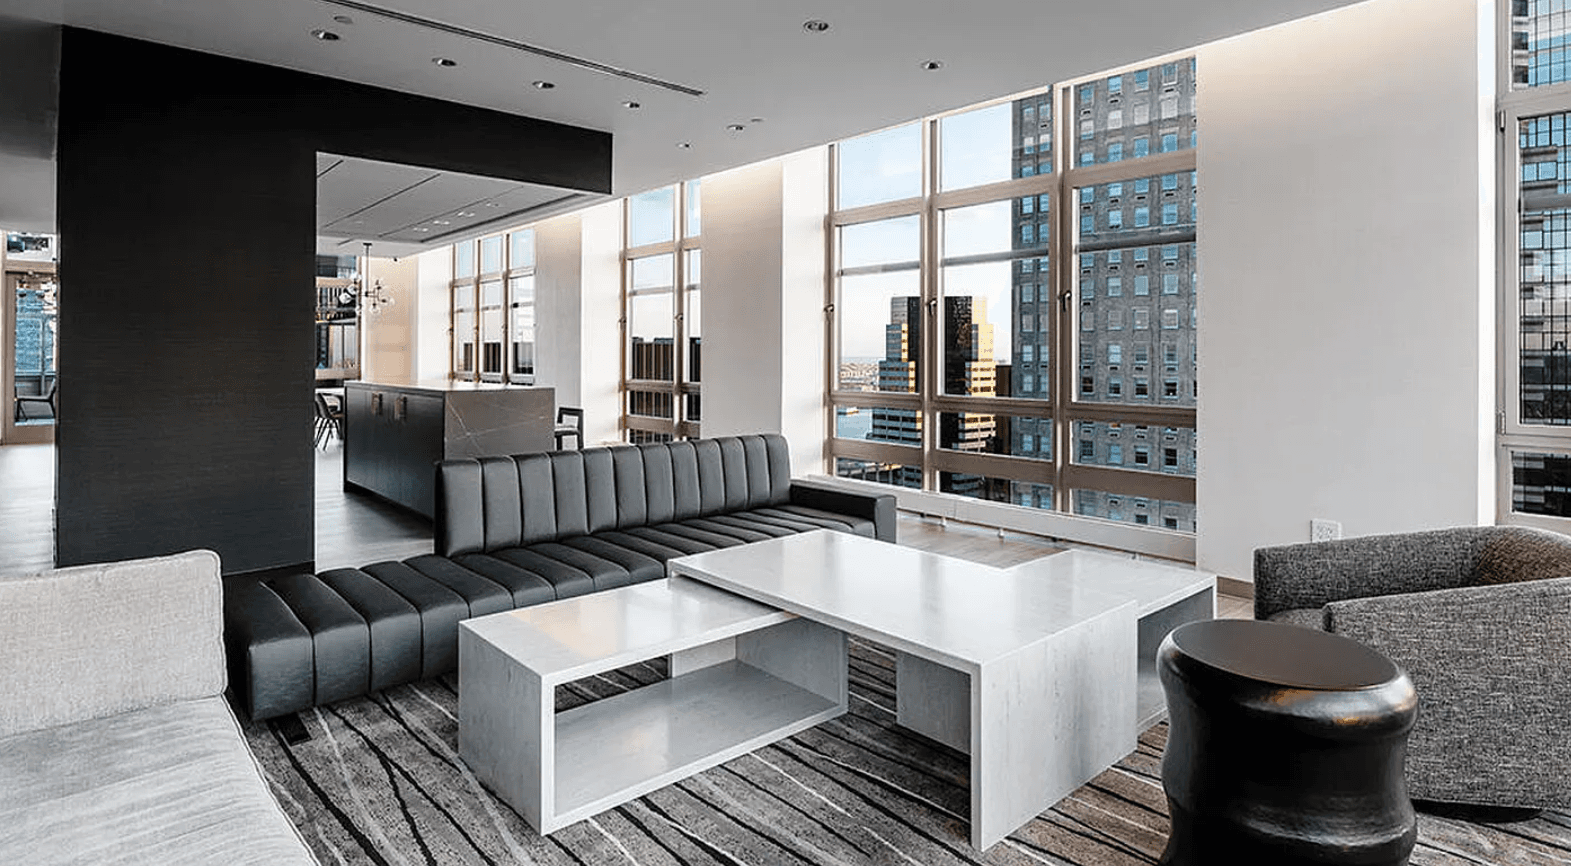 EXCLUSIVE 2BR/2BA IN ULTRA LUXURY HIGH-RISE FINANCIAL DISTRICT BUILDING